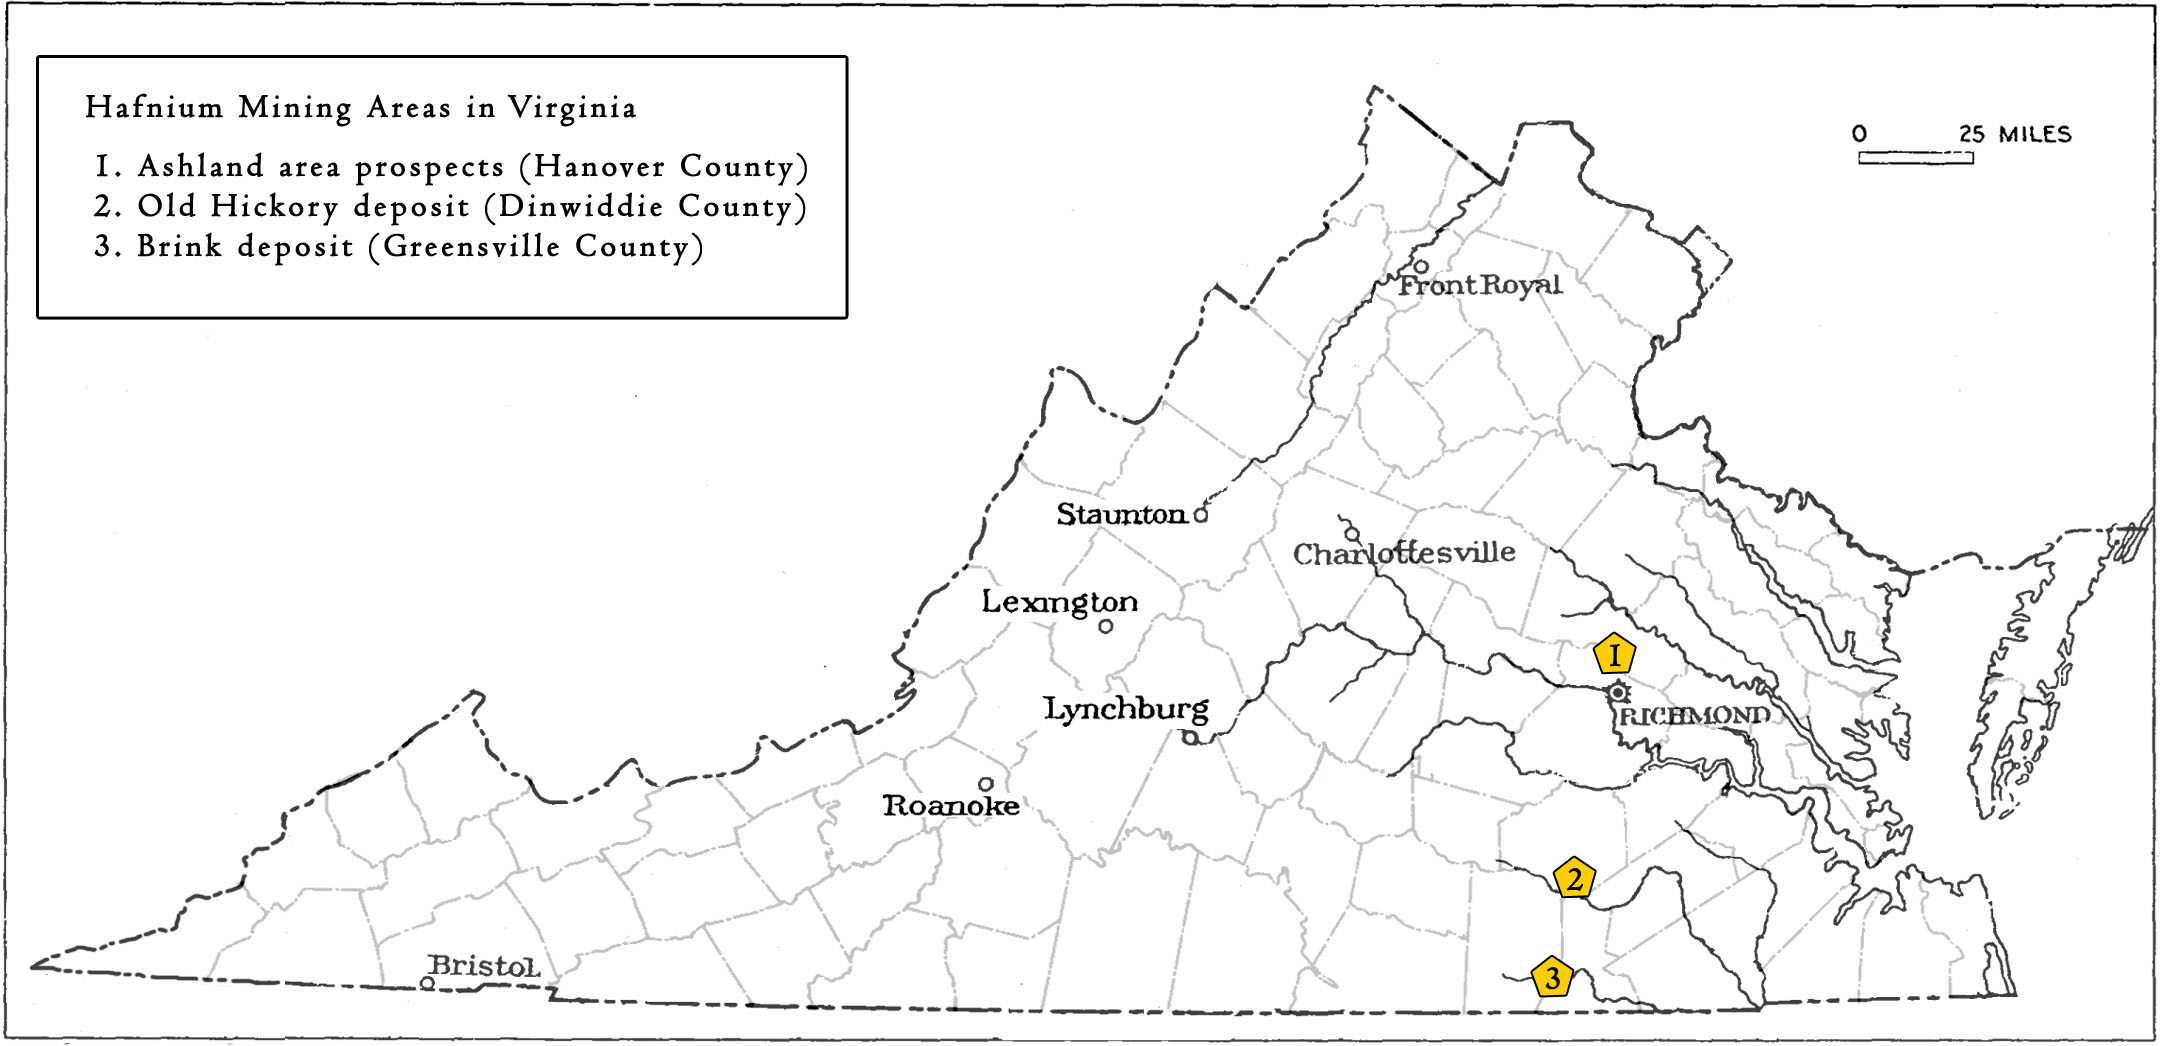 Areas prospected or mined for hafnium in Virginia.